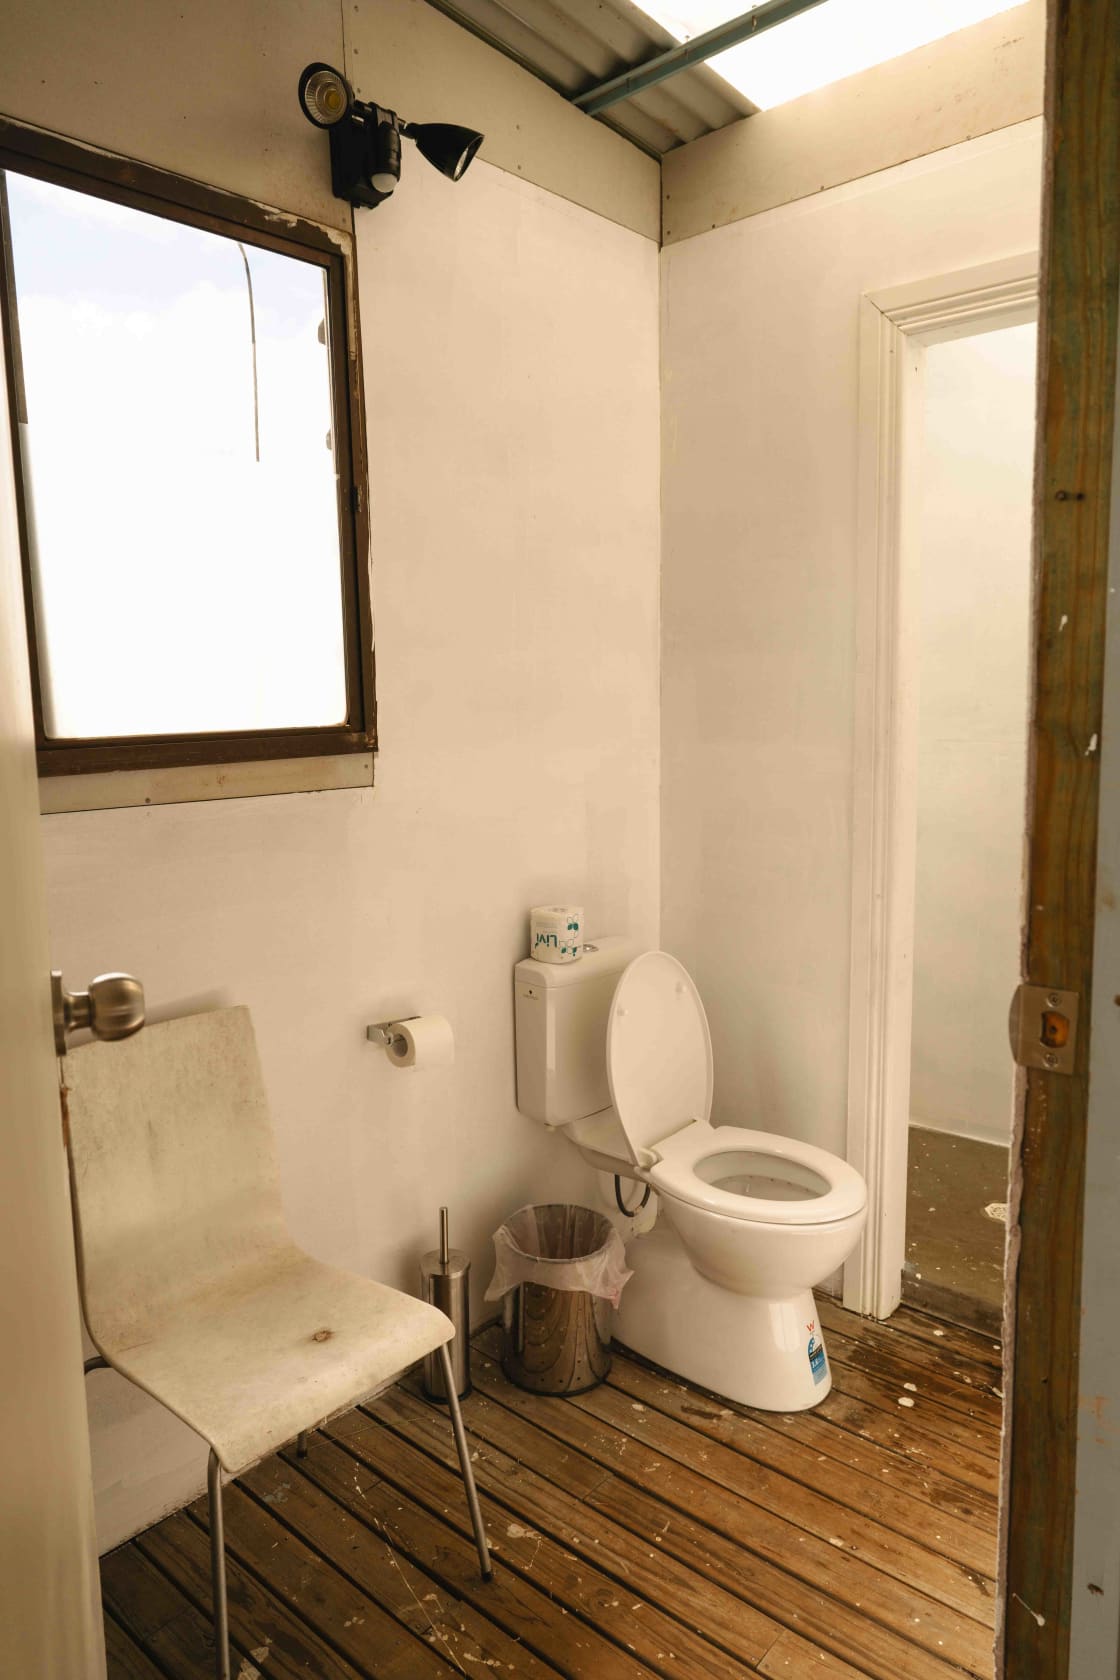 A lovely fully functioning bathroom 